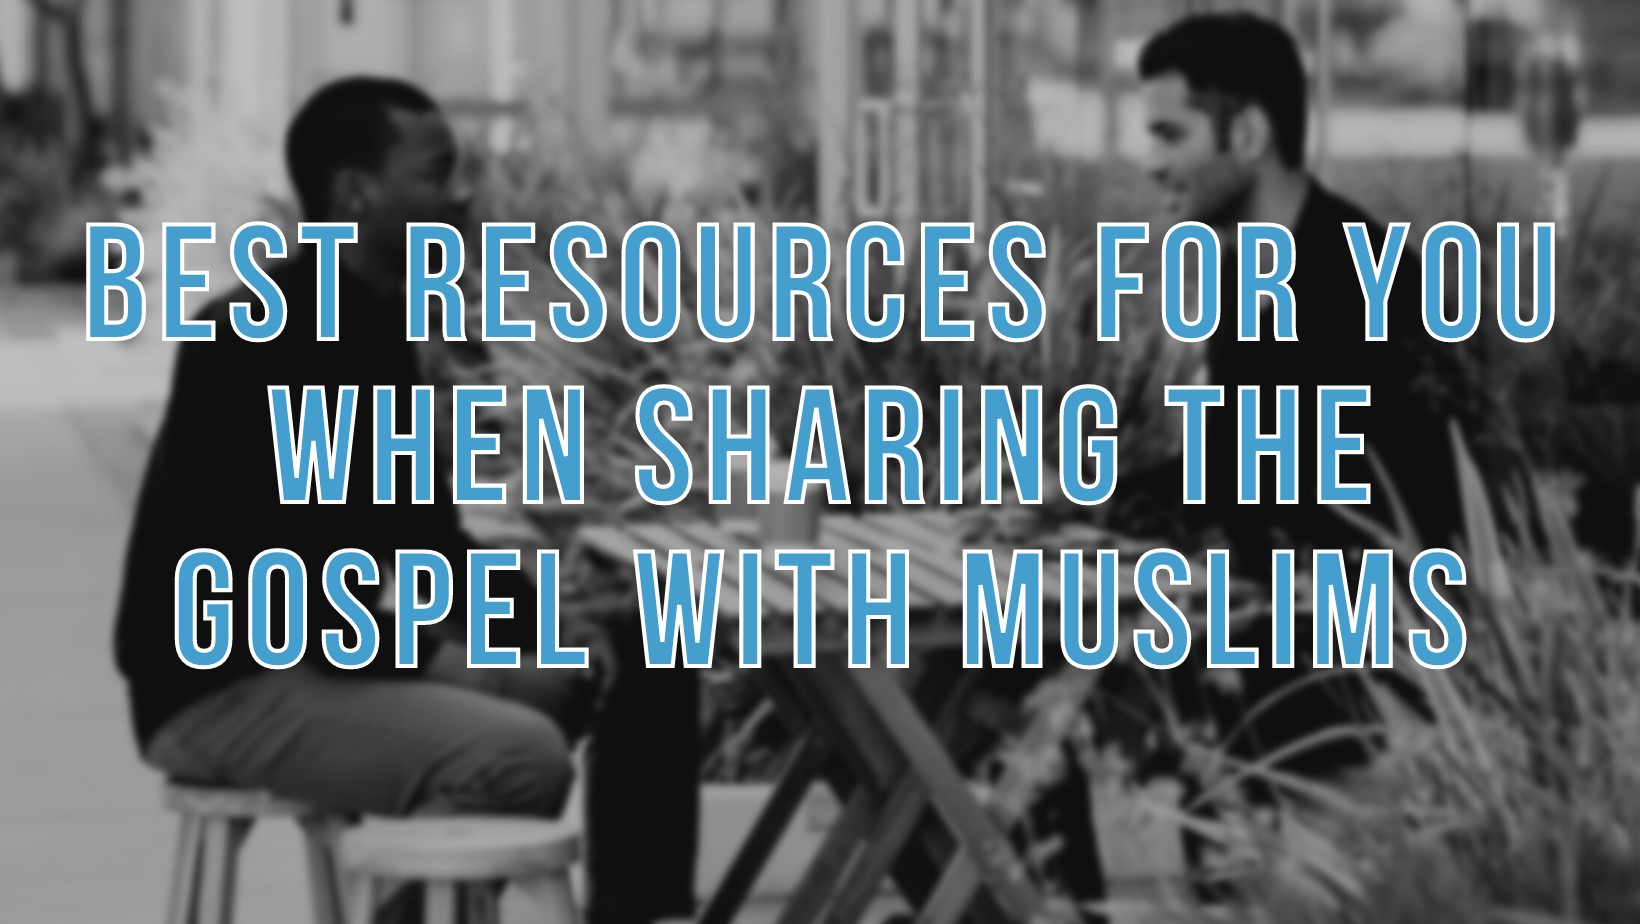 Best resources for you when sharing the Gospel with Muslims